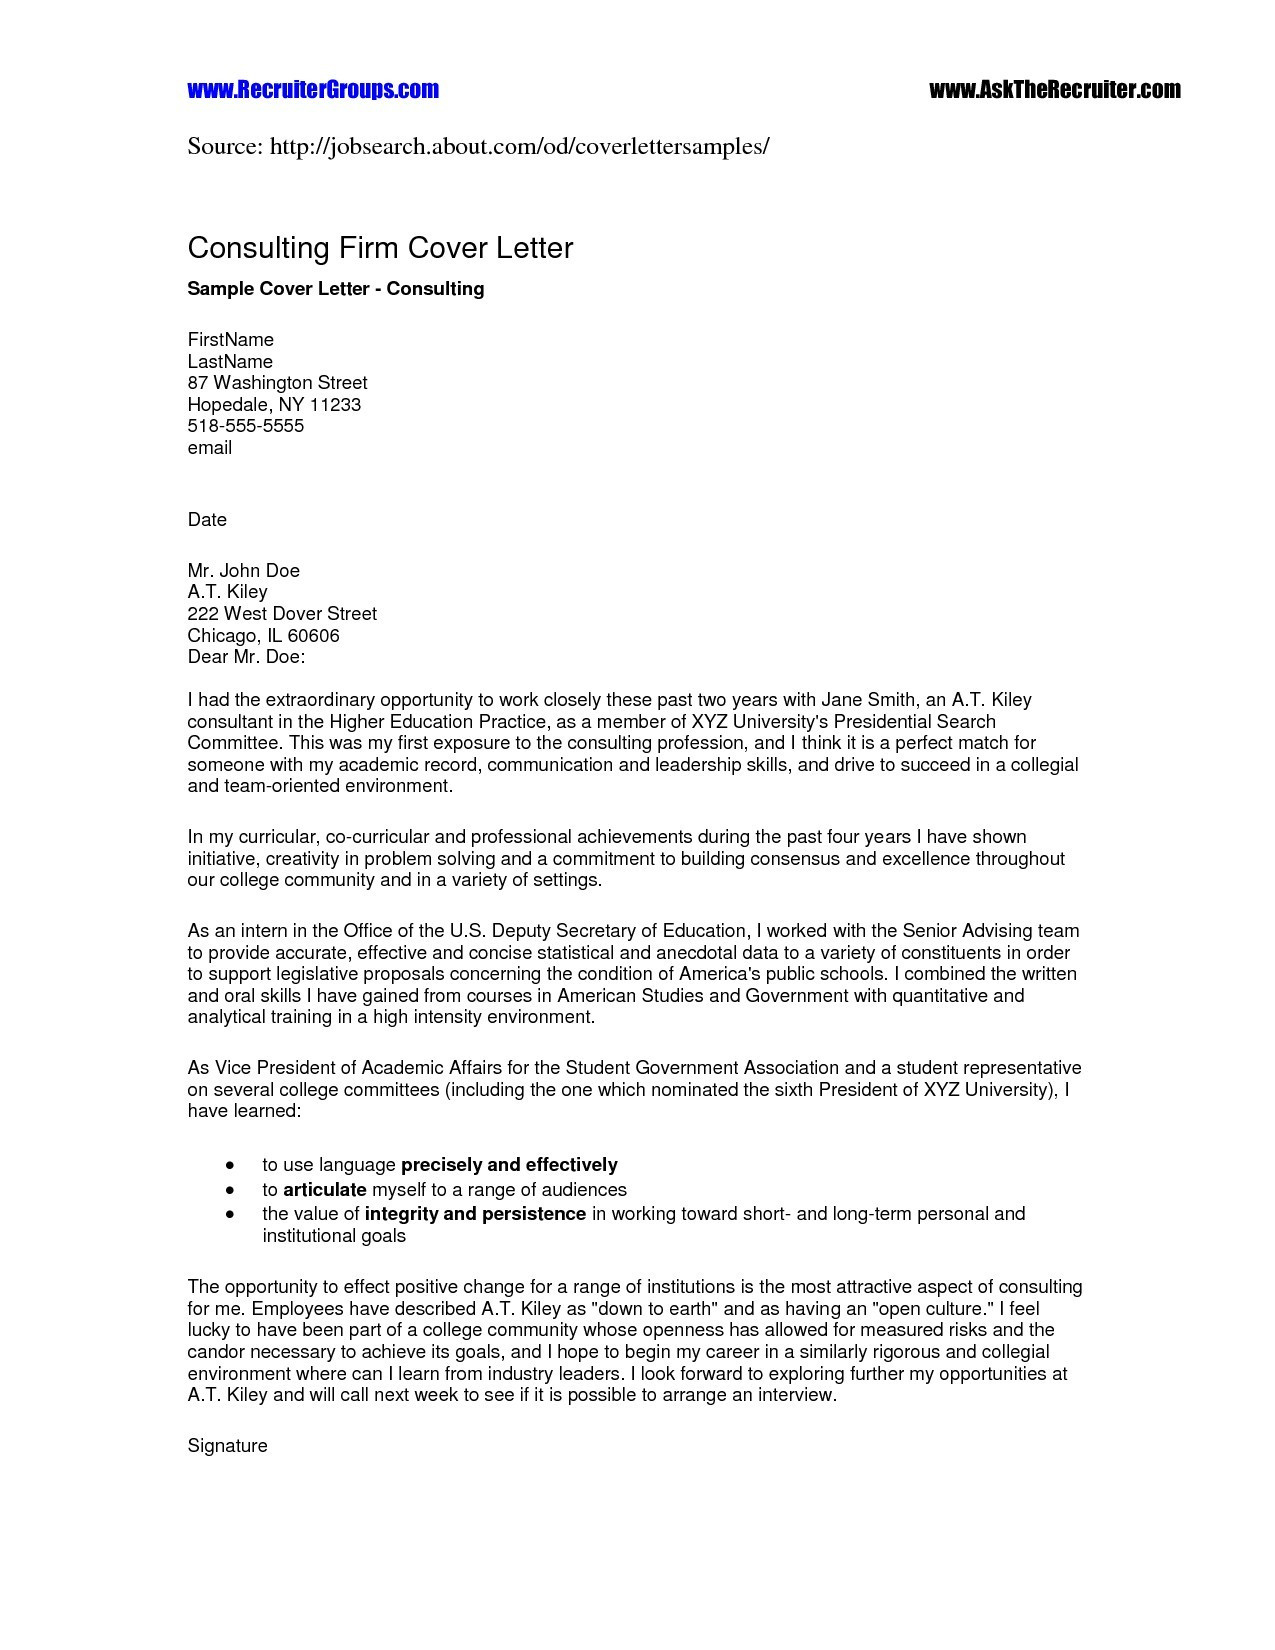 Free Breach Of Contract Letter Template - Sample Breach Contract Letter Beautiful Engagement Letter